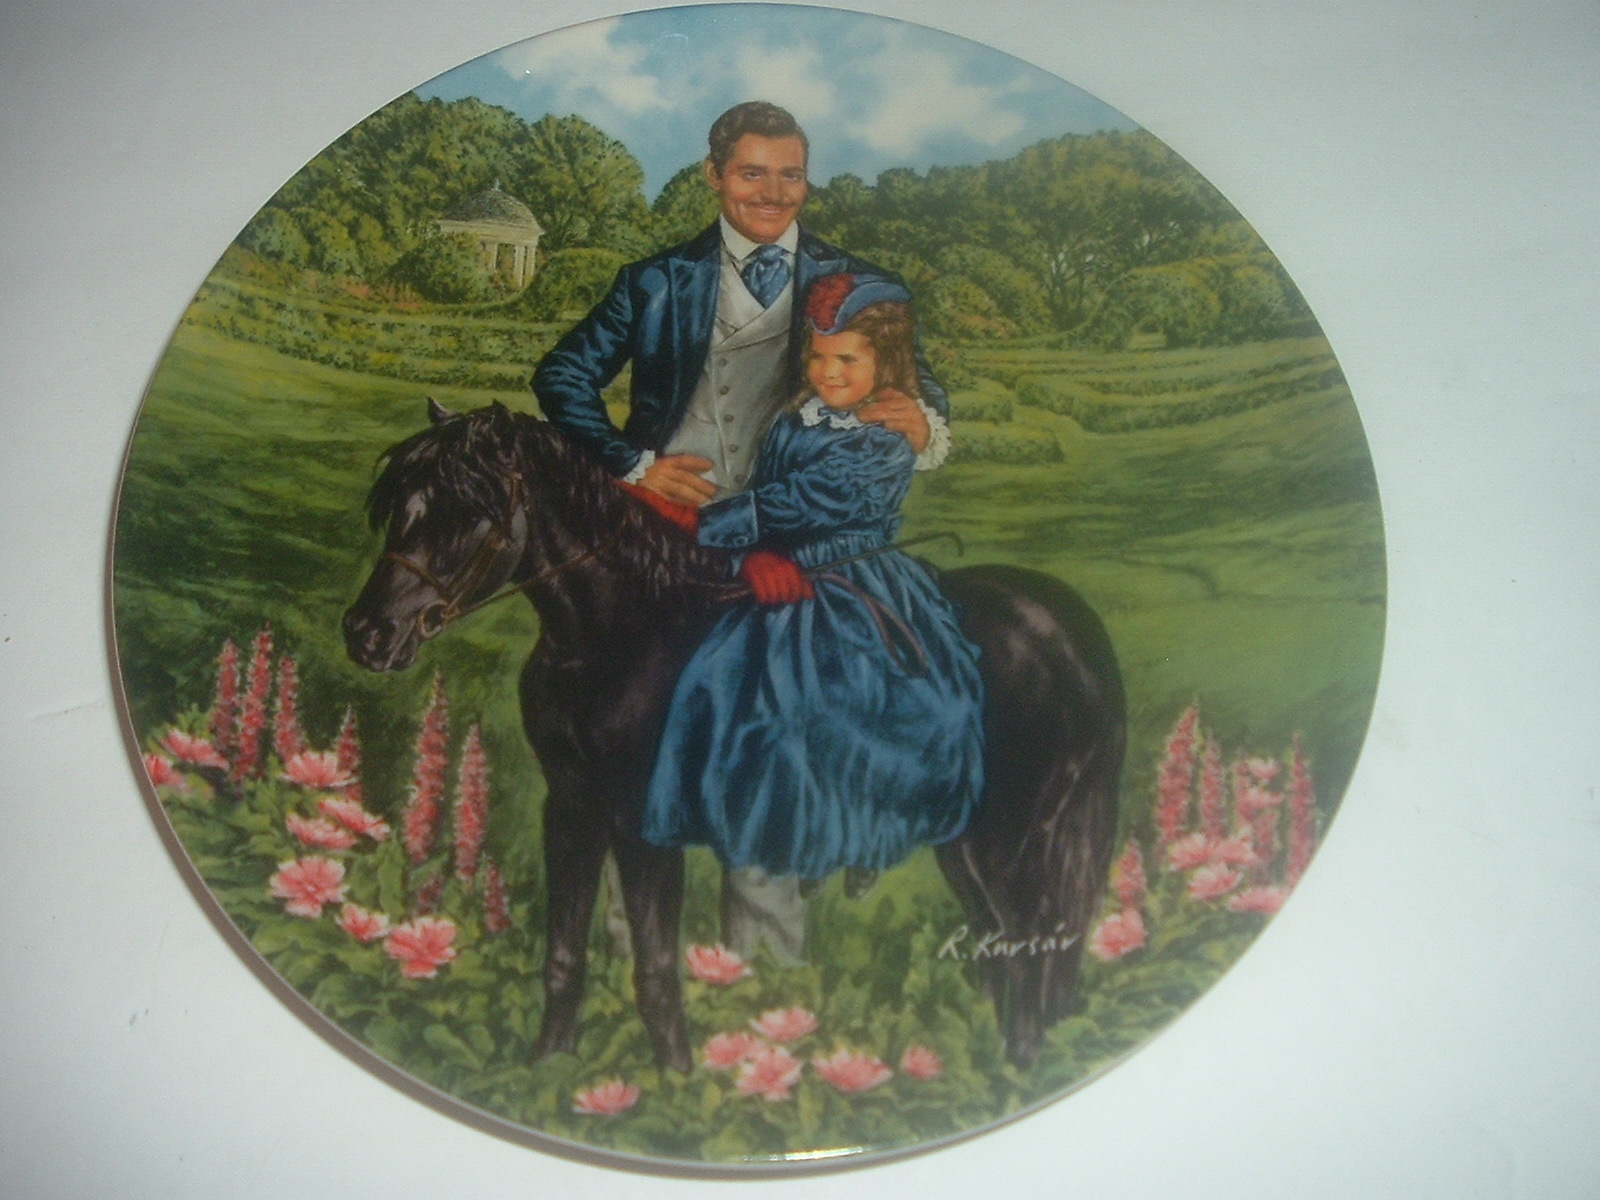 Gone With The Wind Rhett and Bonnie Plate - $14.99